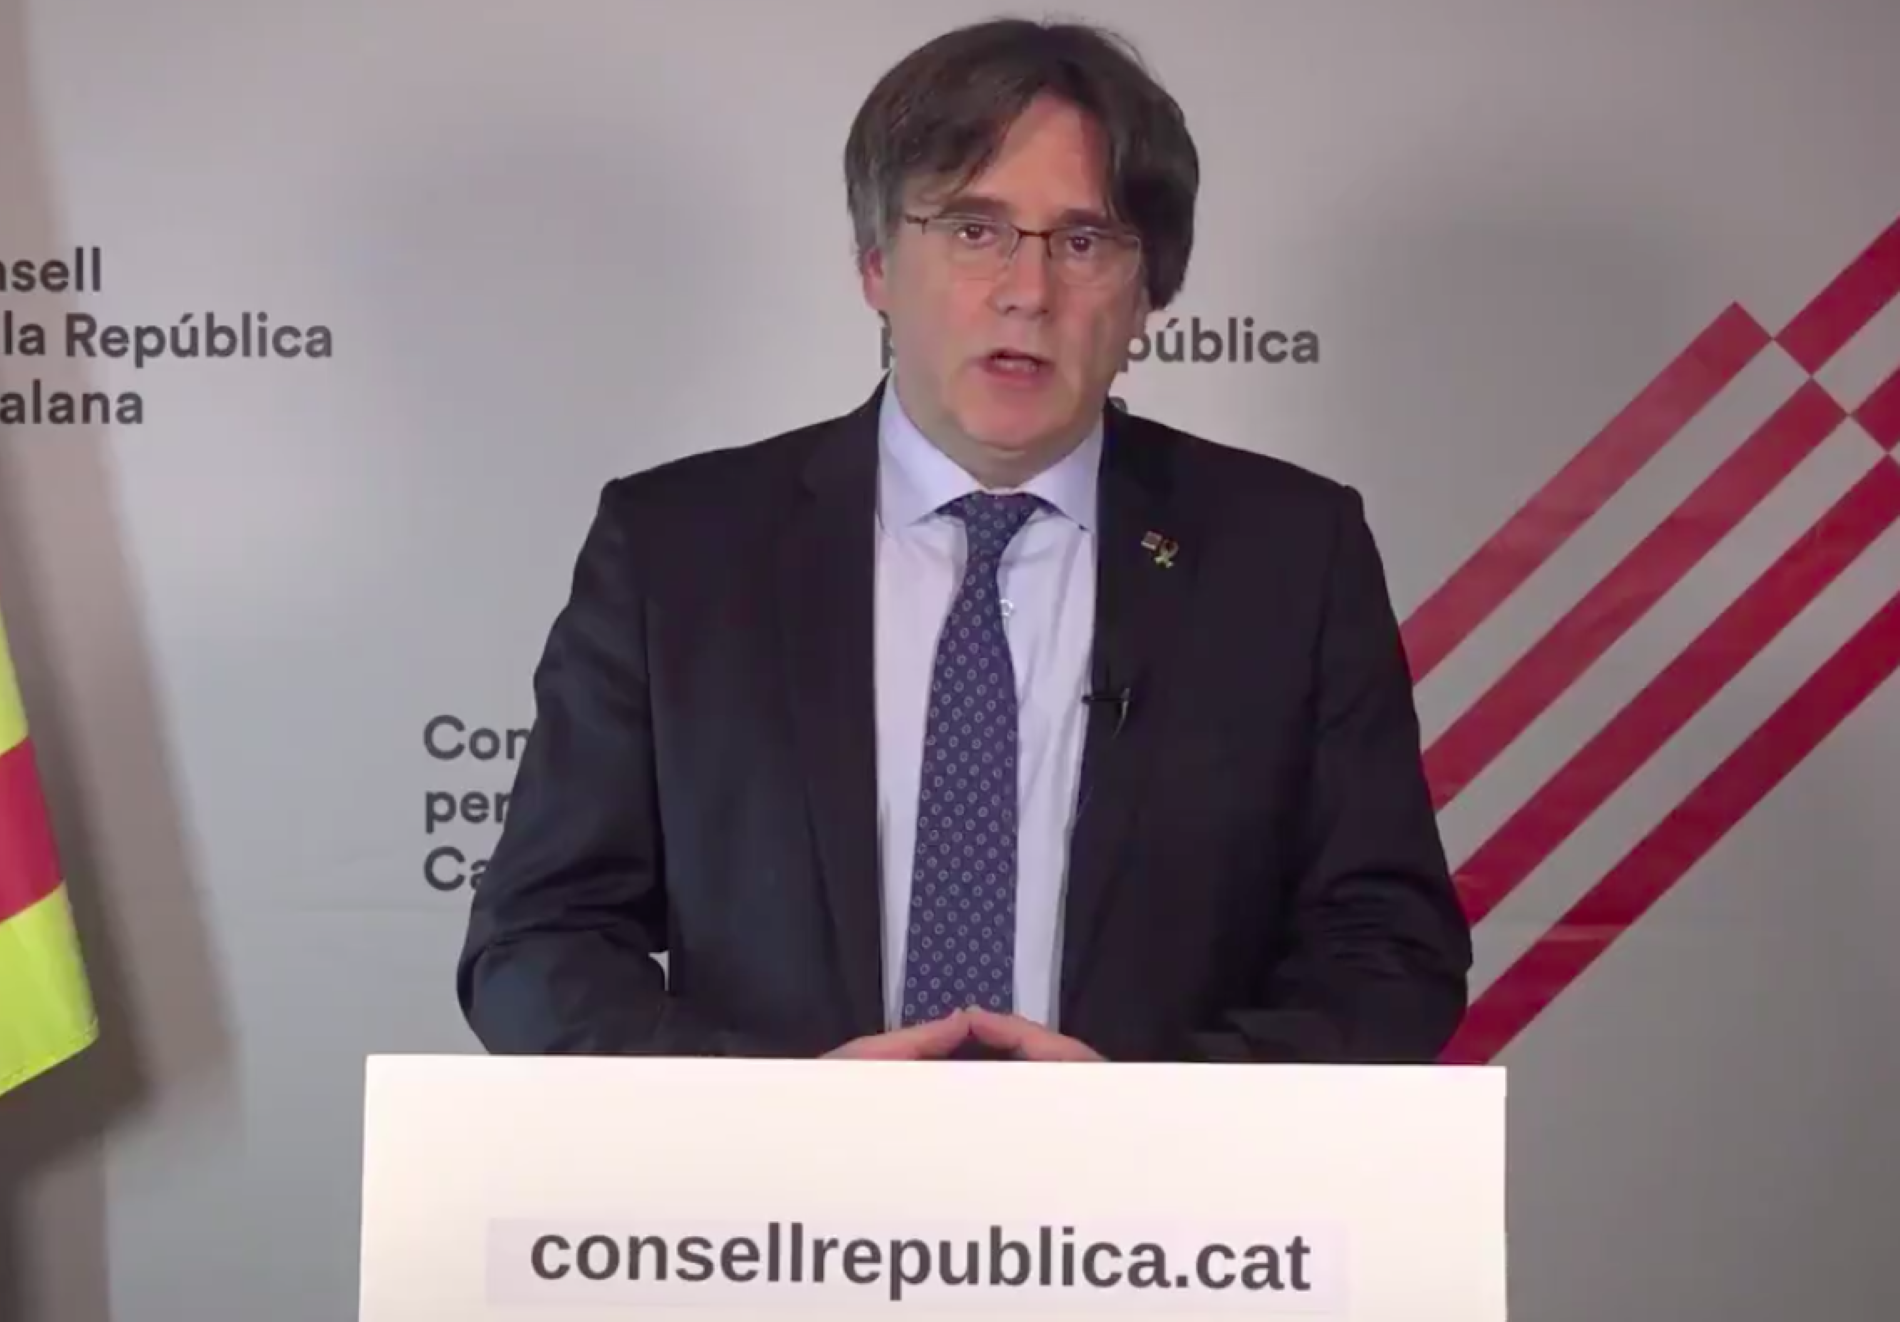 Four exiled Catalan leaders appeal to Spanish PM to abide by Belgian ruling